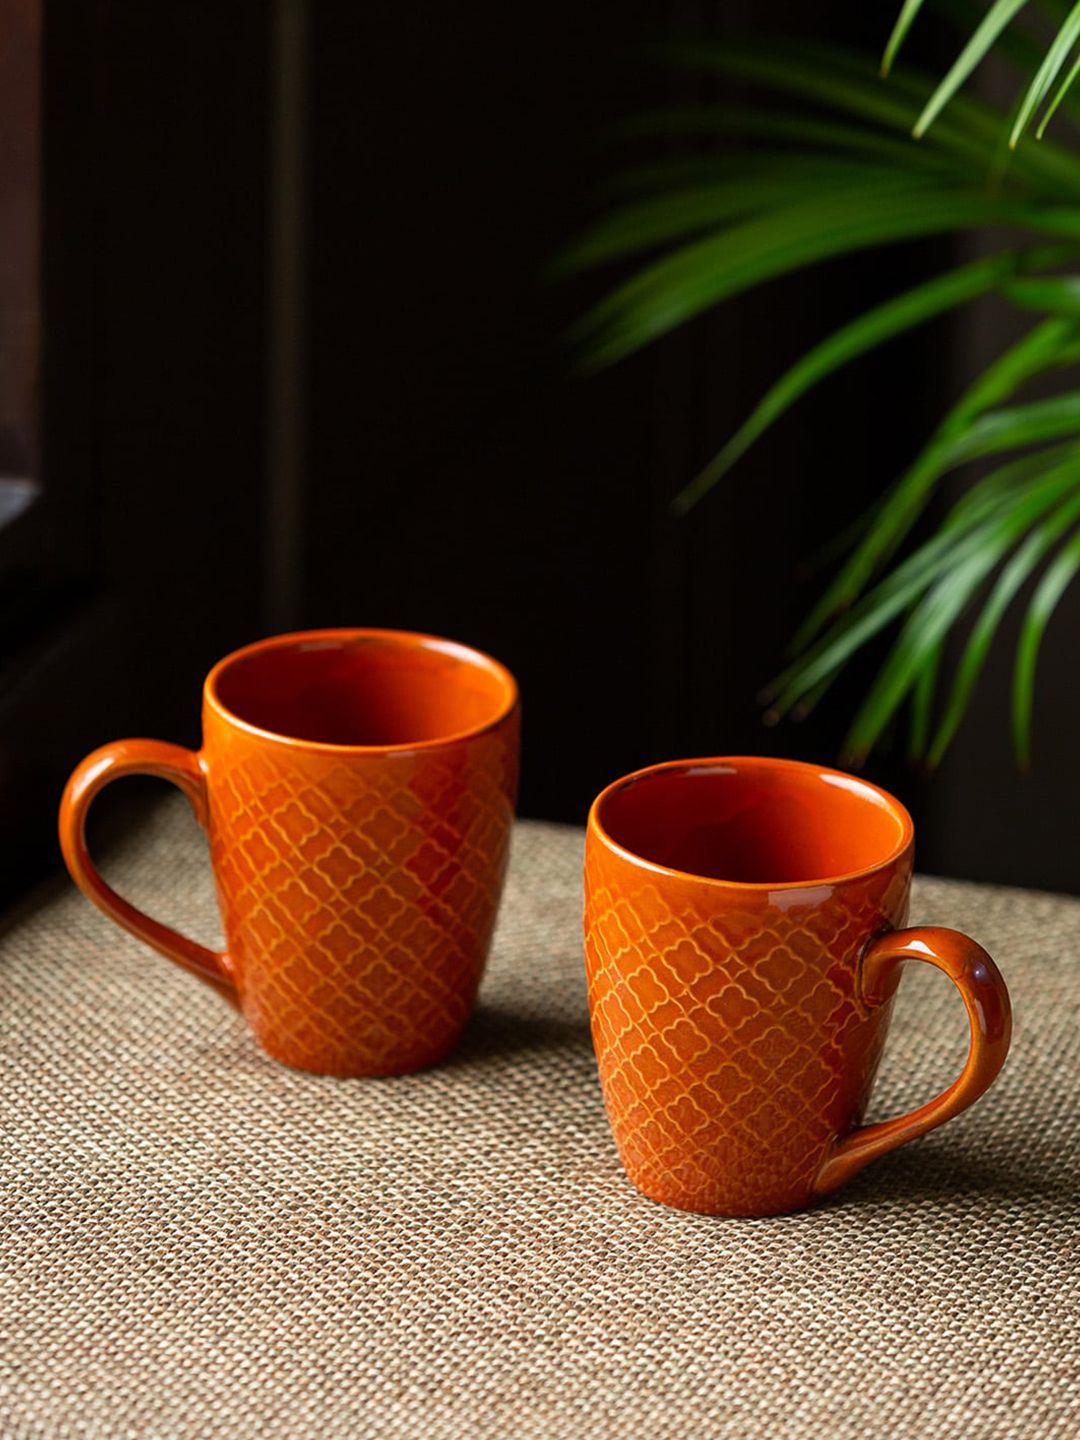 ExclusiveLane Set Of 2 Brown & Gold-Toned Handcrafted Ceramic Glossy Coffee Mugs Price in India